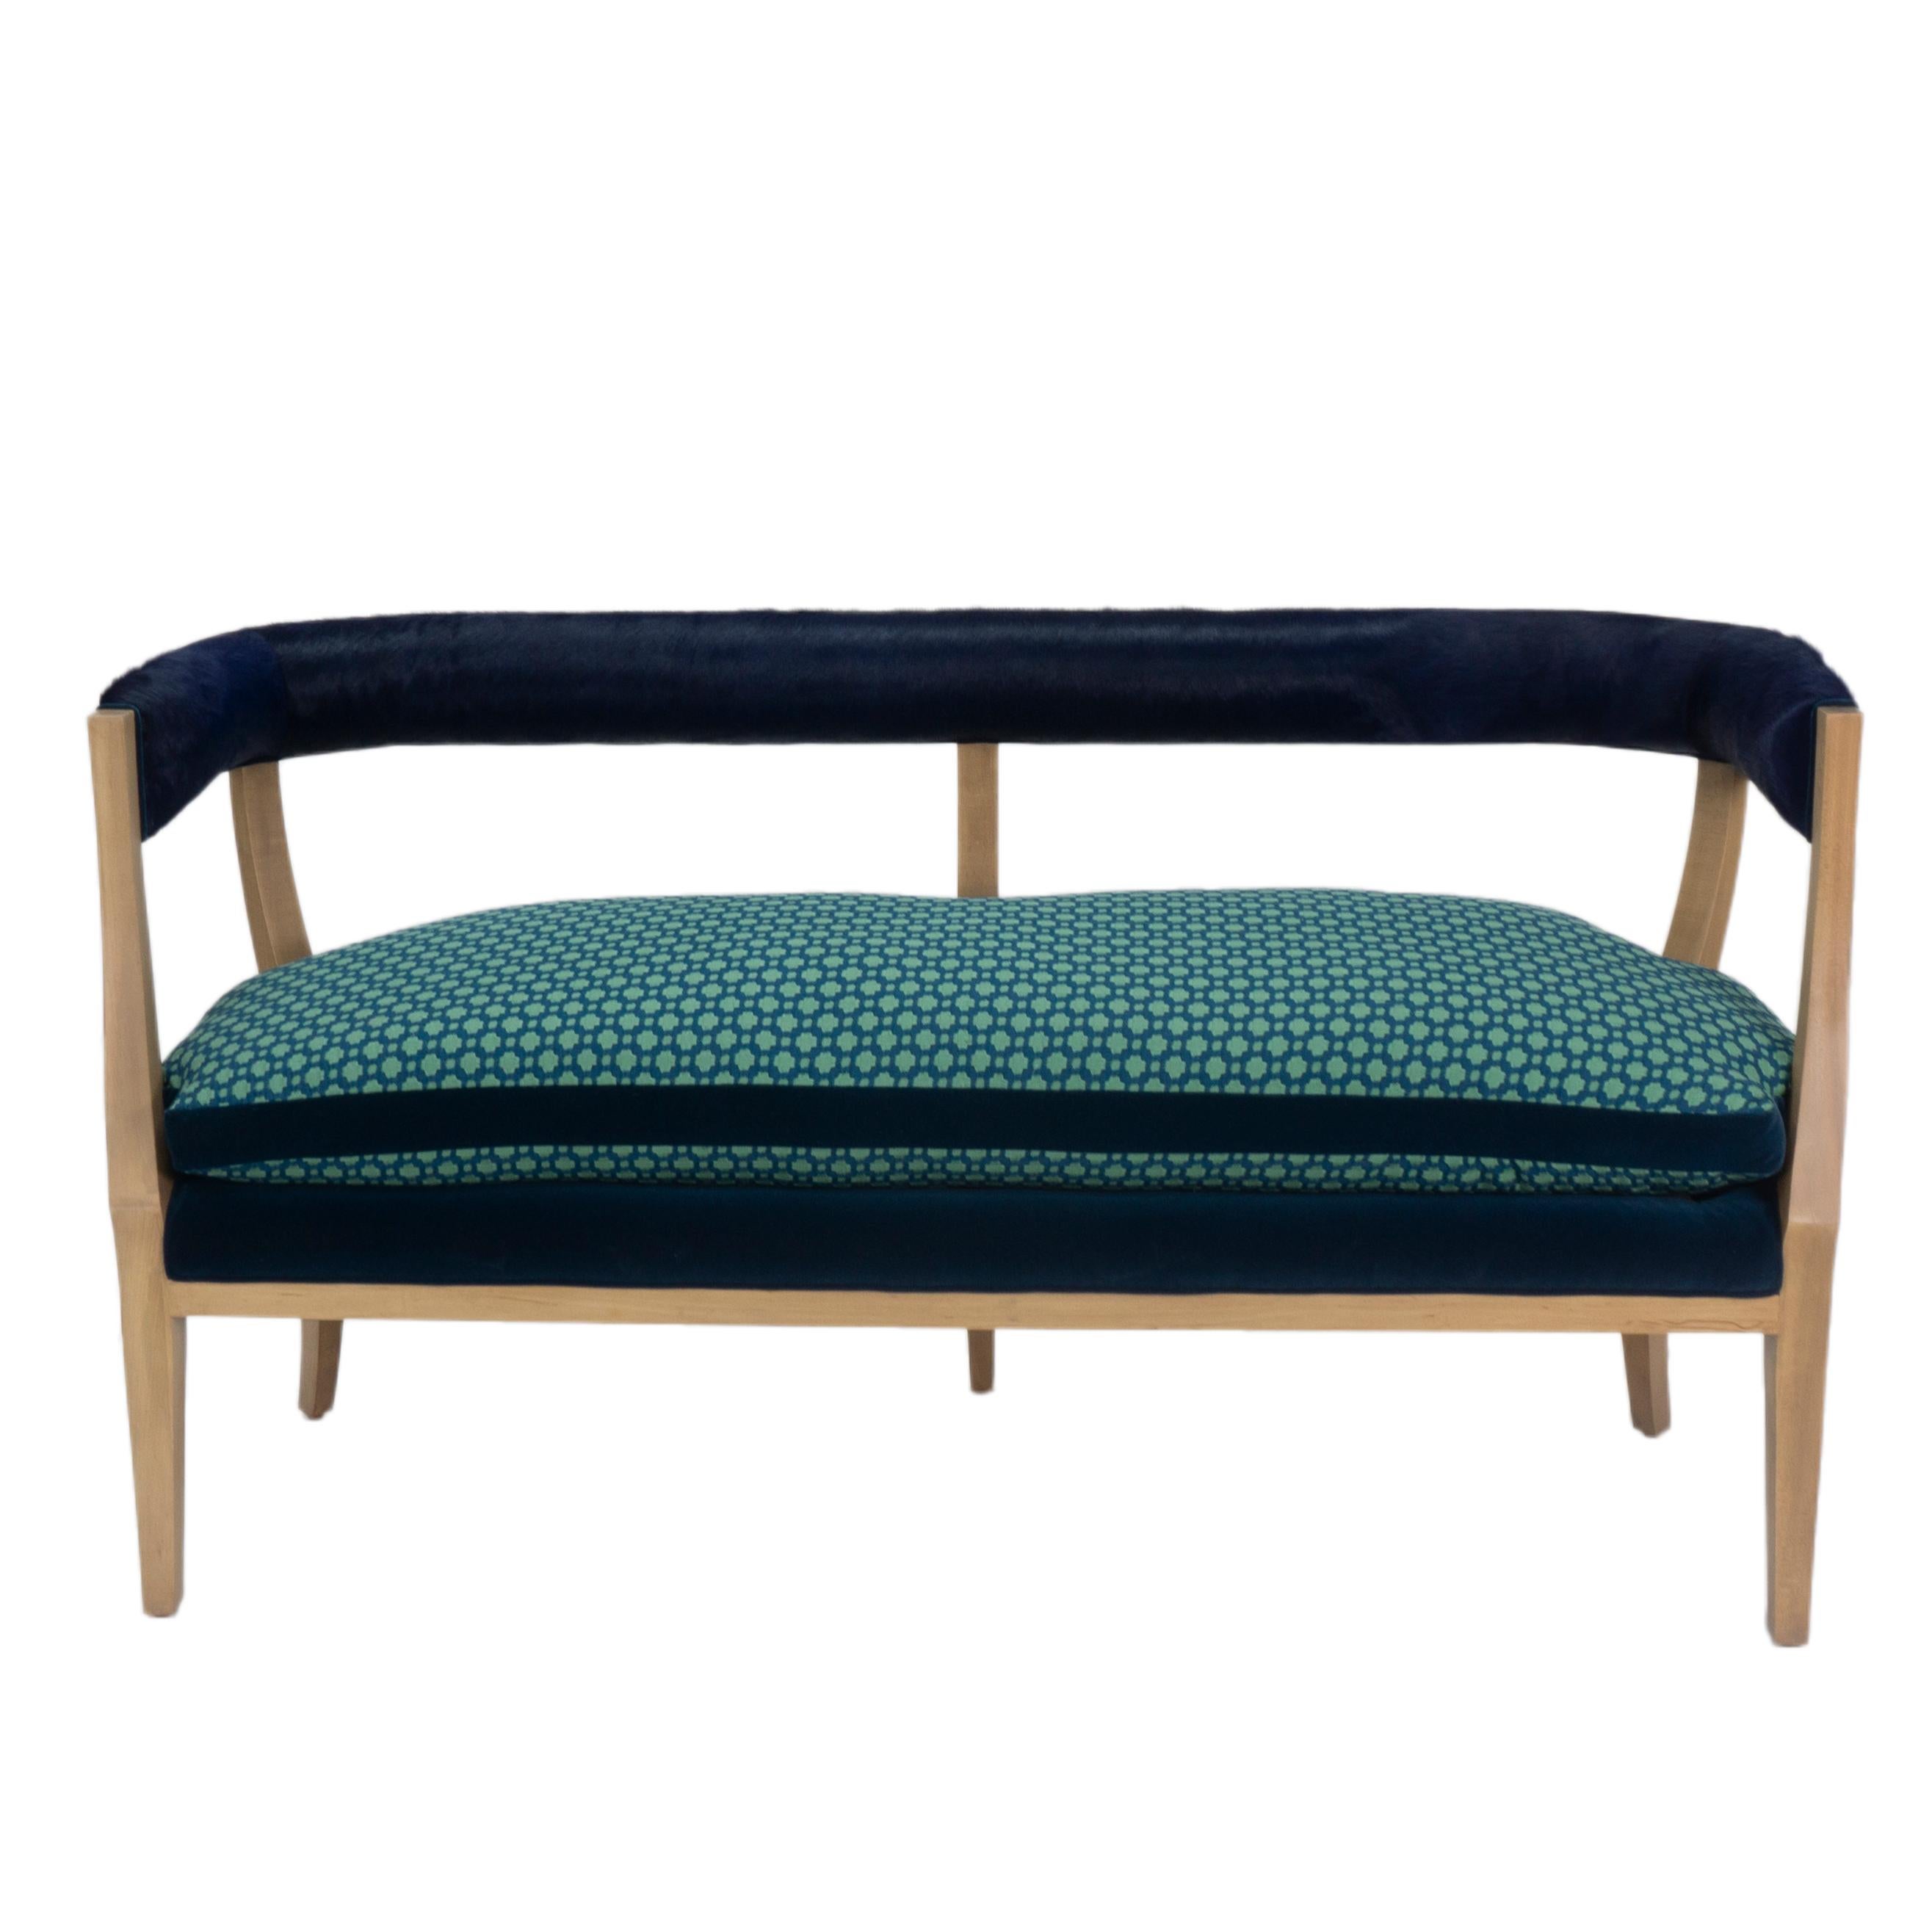 Modern classic curved back dining bench upholstered with blue velvet decking and geometric patterned loose cushion. The back features a blue dyed cowhide. The bench also features velvet piping on the deck and back. Exposed poplar legs finished and